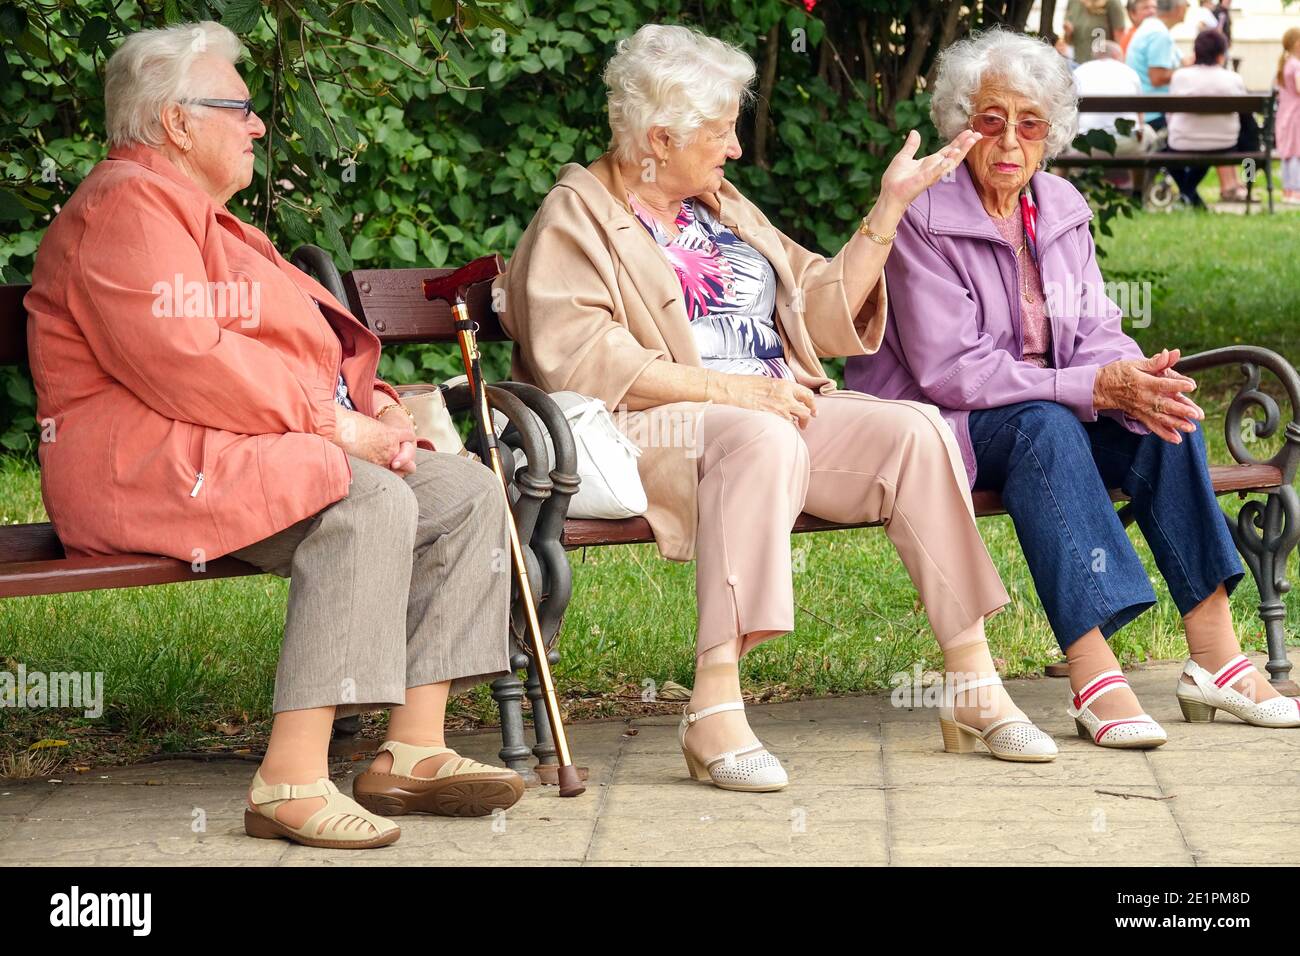 Three elderly women sitting on a bench in a city park Seniors ageing, Old women bench, old people, seniors ageing population senior friends outdoors Stock Photo